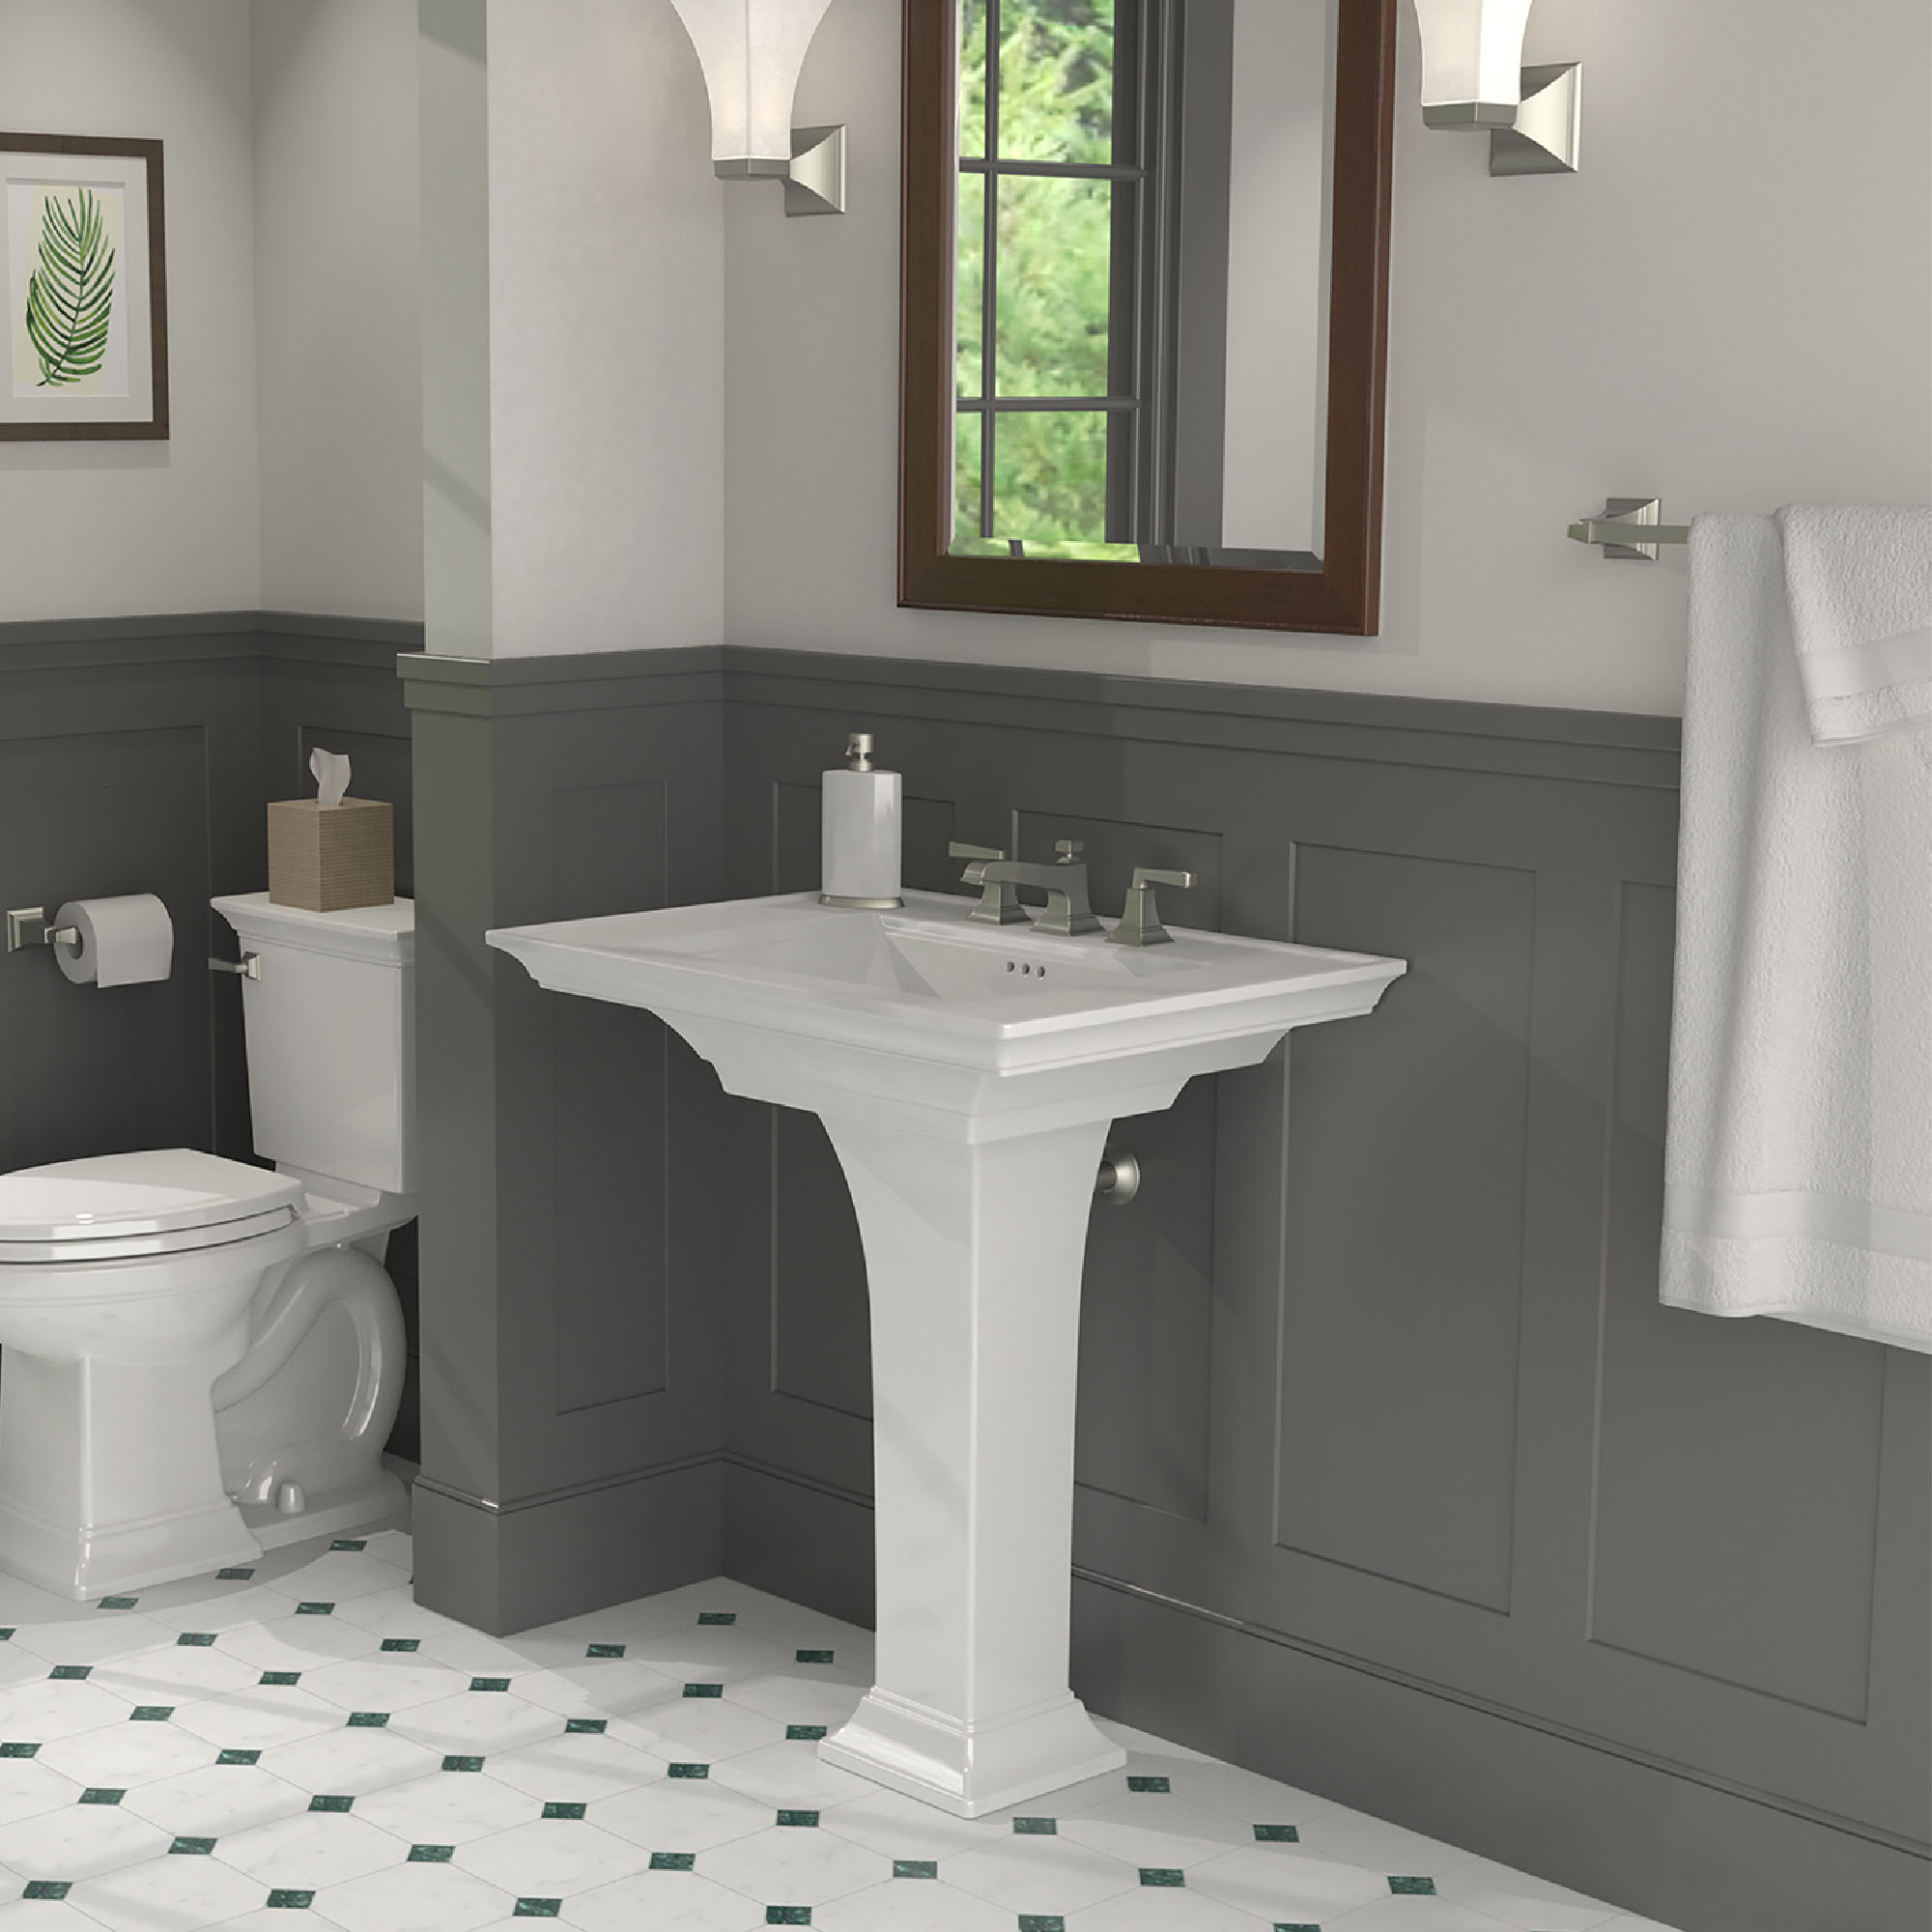 Town Square™ S 8-Inch Widespread Pedestal Sink Top and Leg Combination